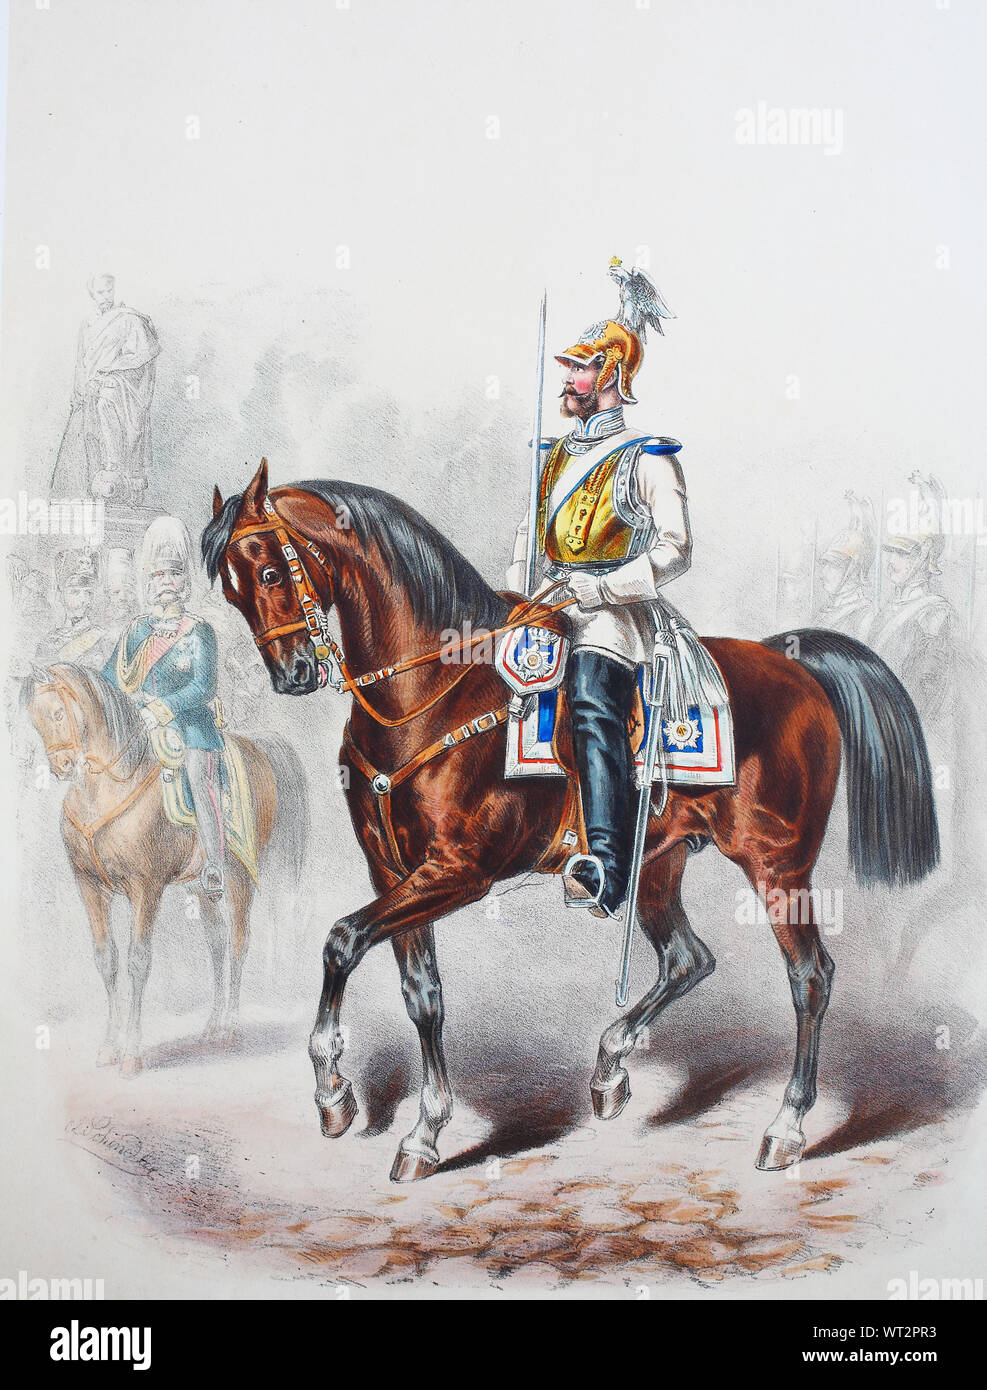 Royal Prussian Army, Guards Corps, Preußens Heer, preussische Garde, Garde Kürassier Regiment, Offizier, Digital improved reproduction of an illustration from the 19th century Stock Photo